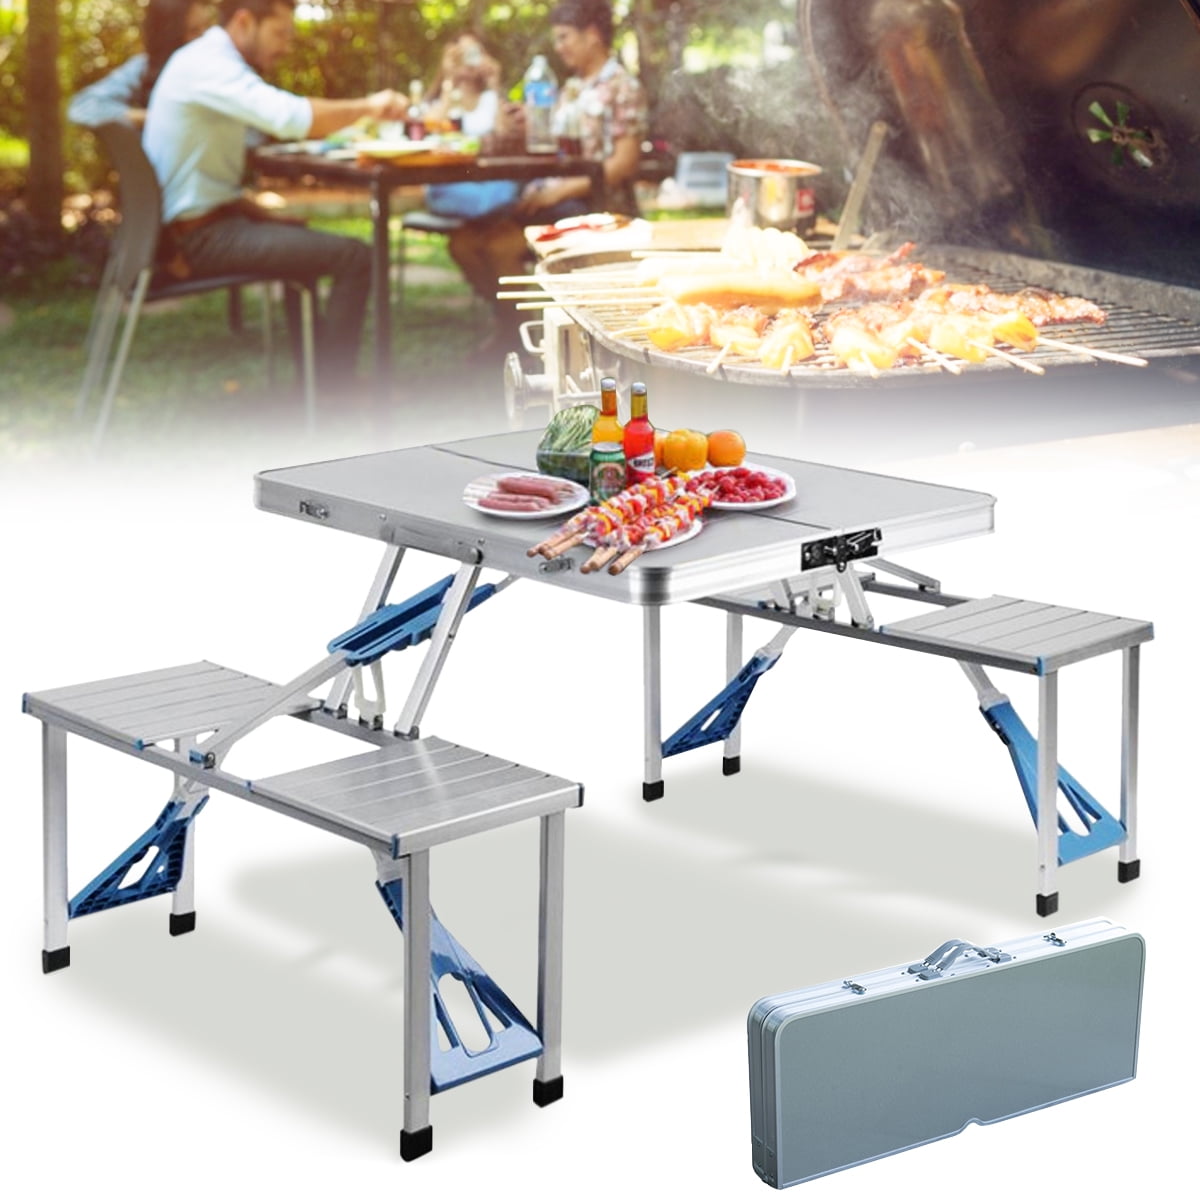 FOLDING PORTABLE TABLE SET WITH 4 CHAIR KITCHEN DINING OUTDOOR PICNIC CAMPING 